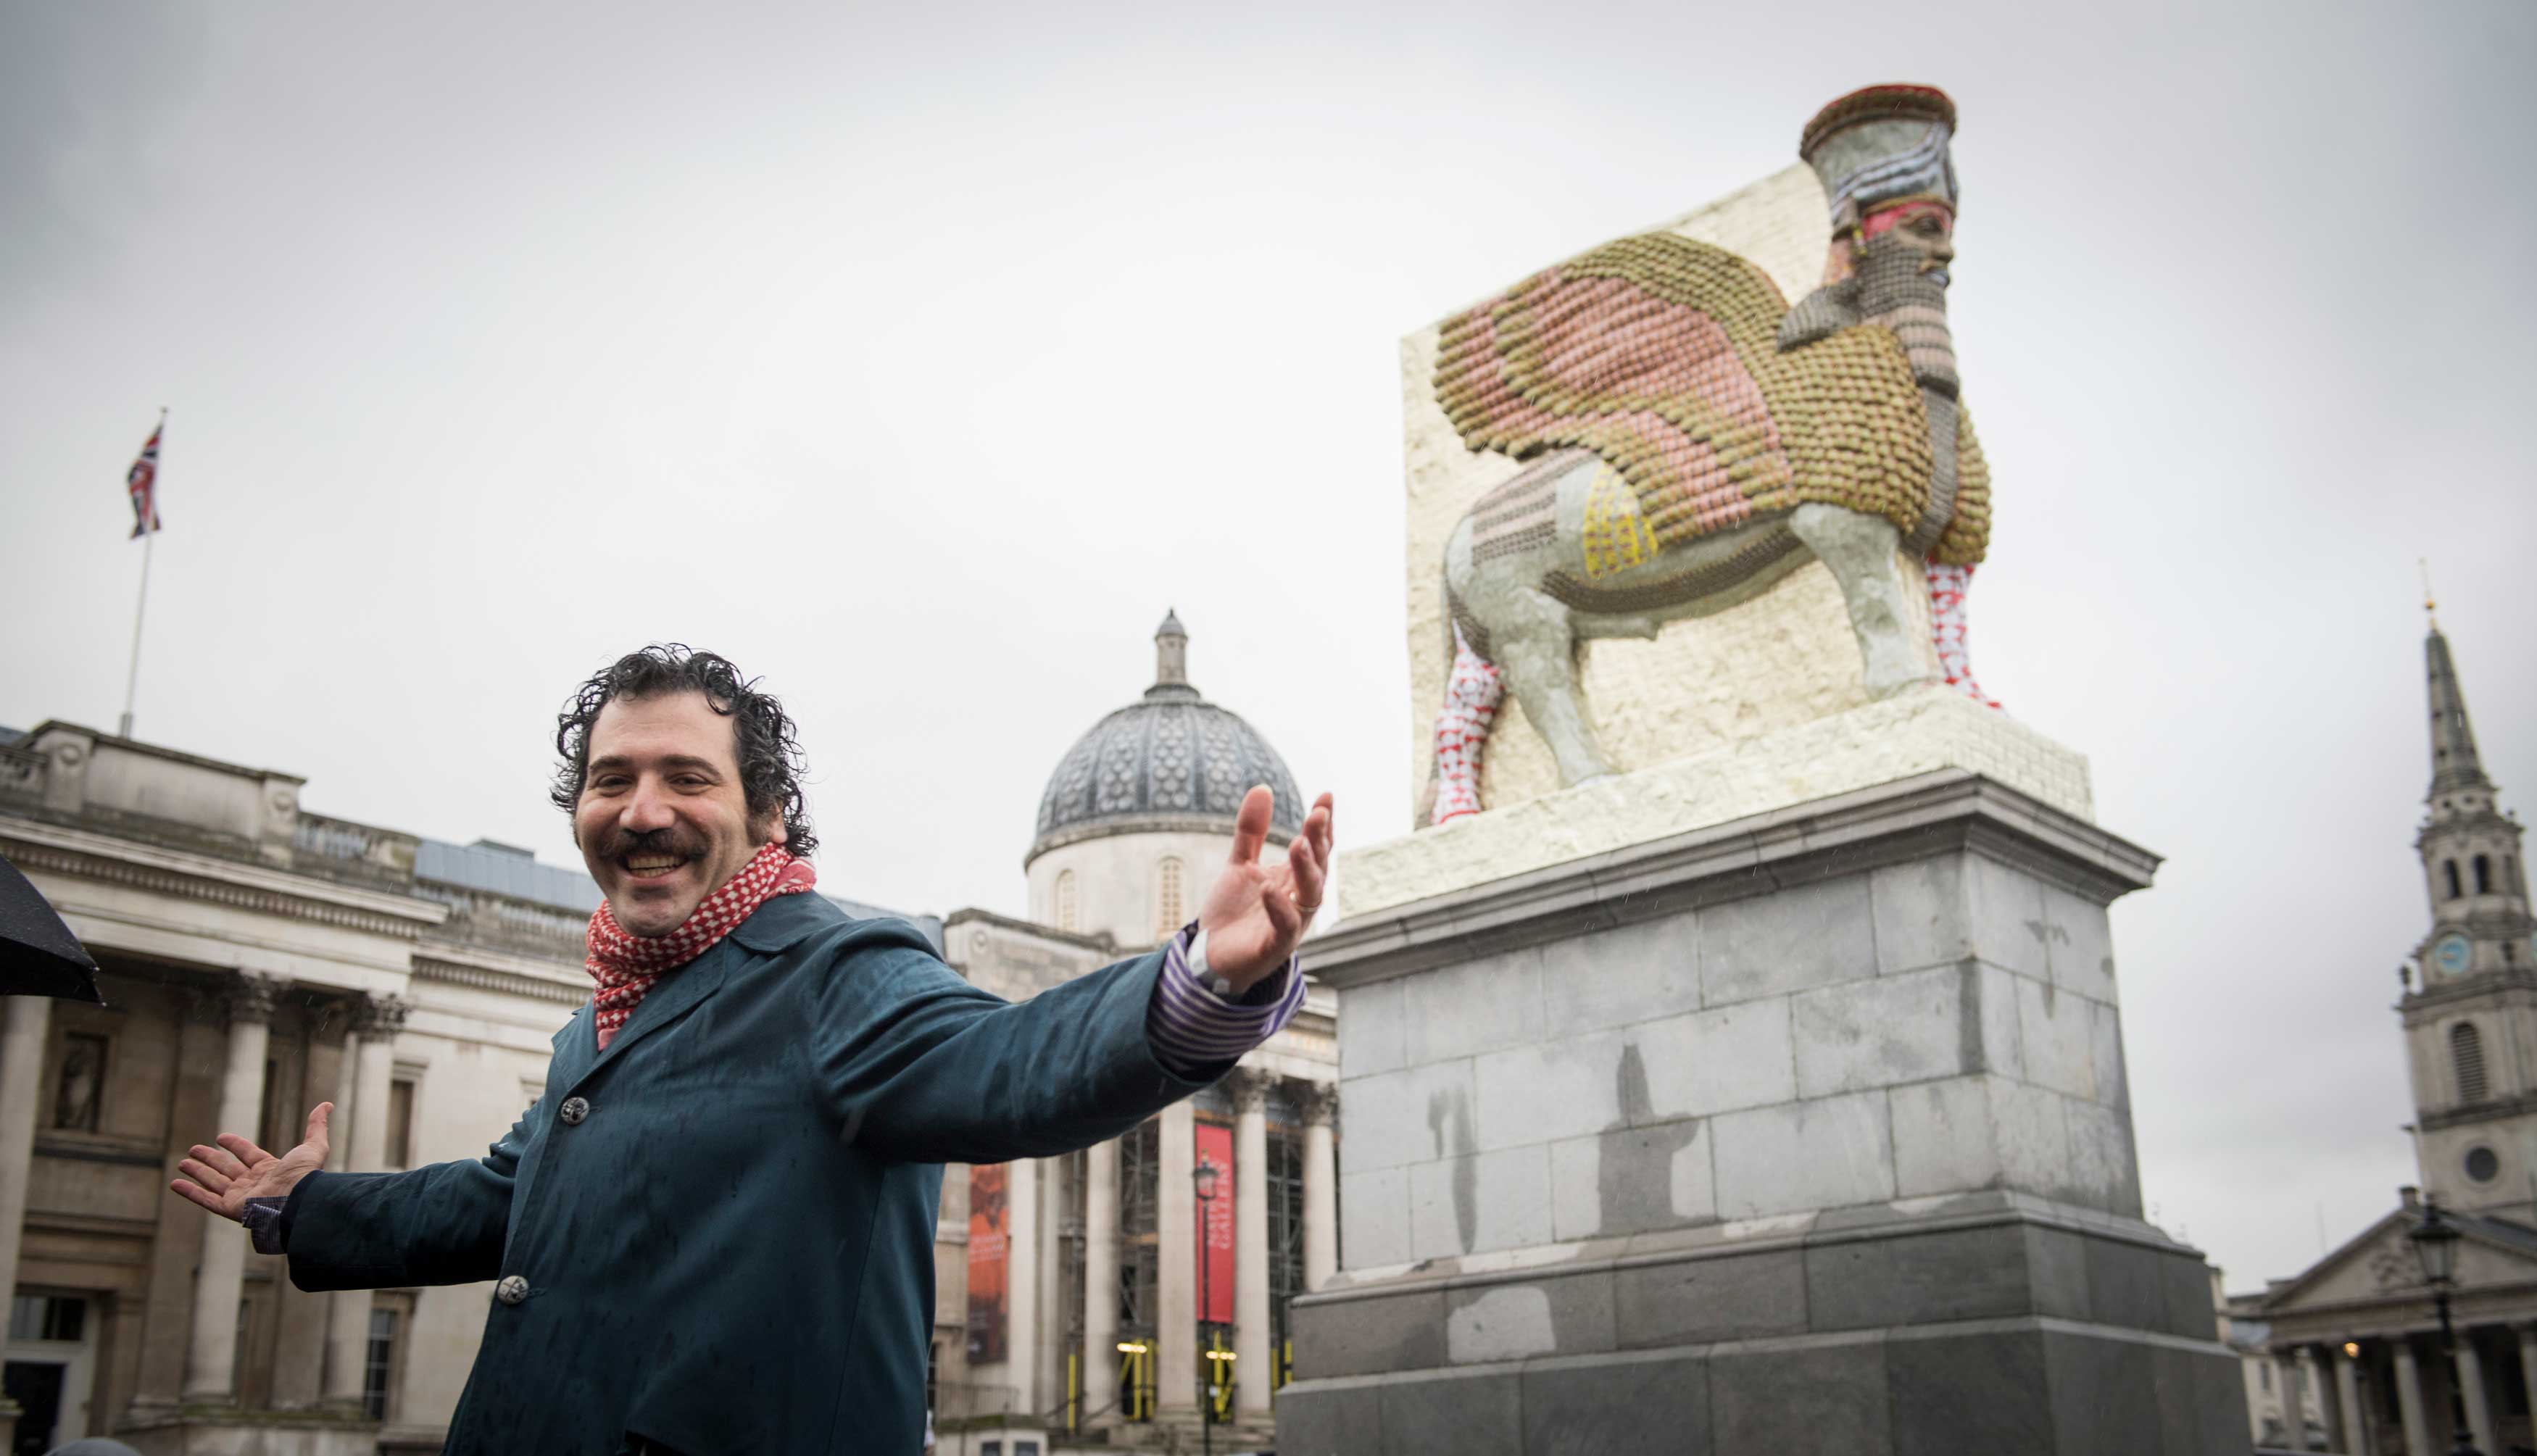 The artist unveils his fourth Plinth commission, photo by Caroline Teo